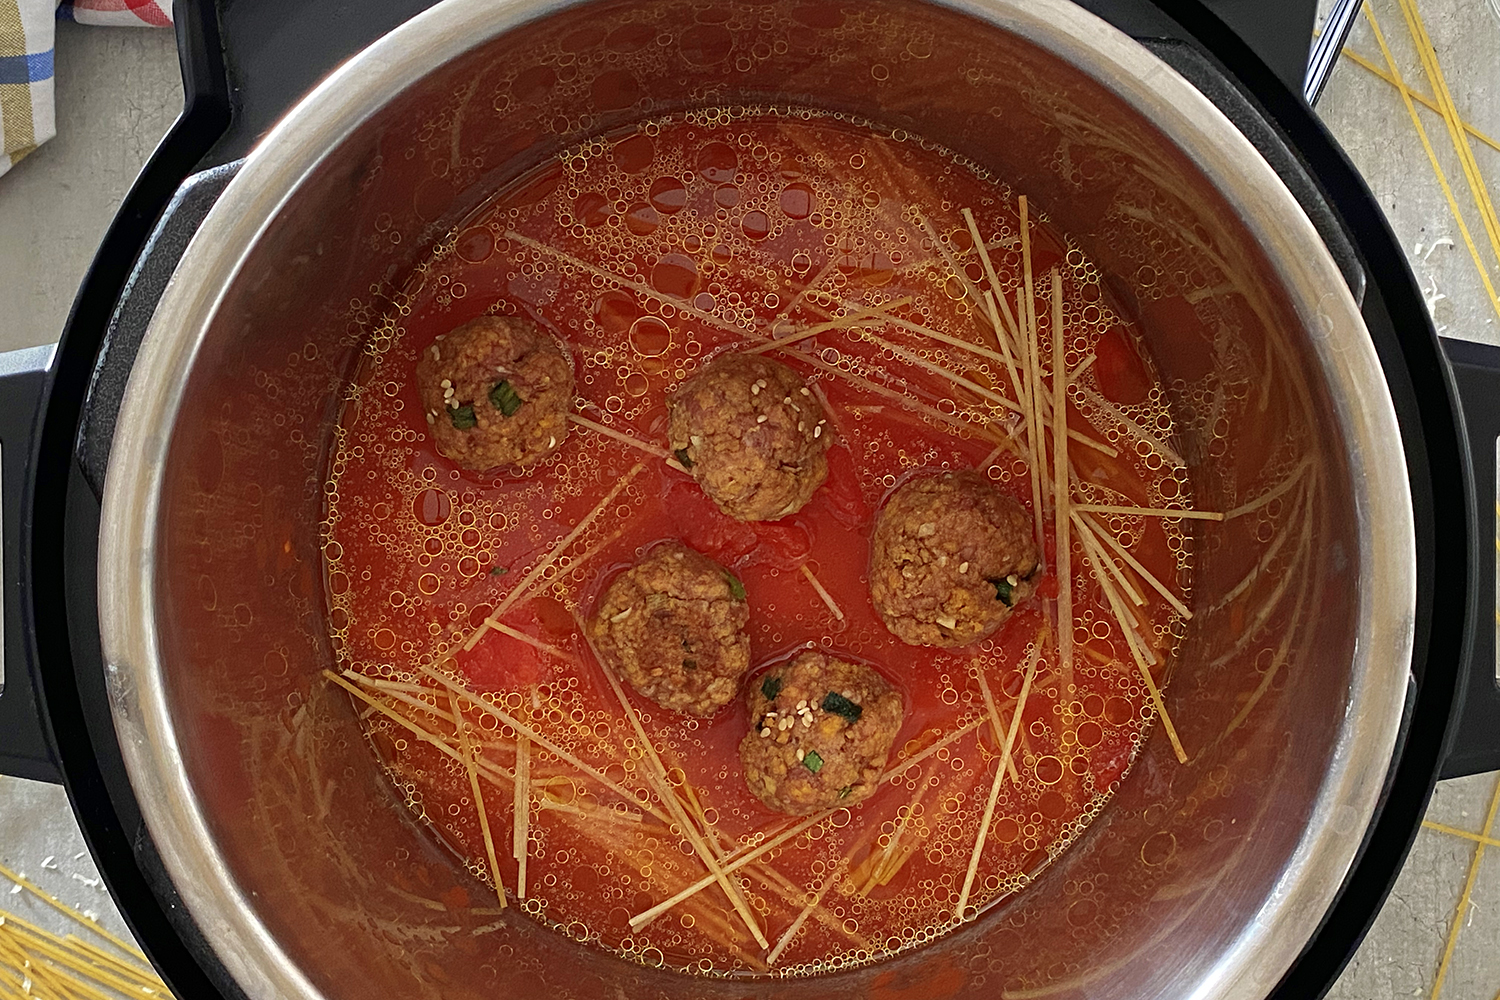 Spaghetti with meatballs in tomato sauce inside Instant Pot top view